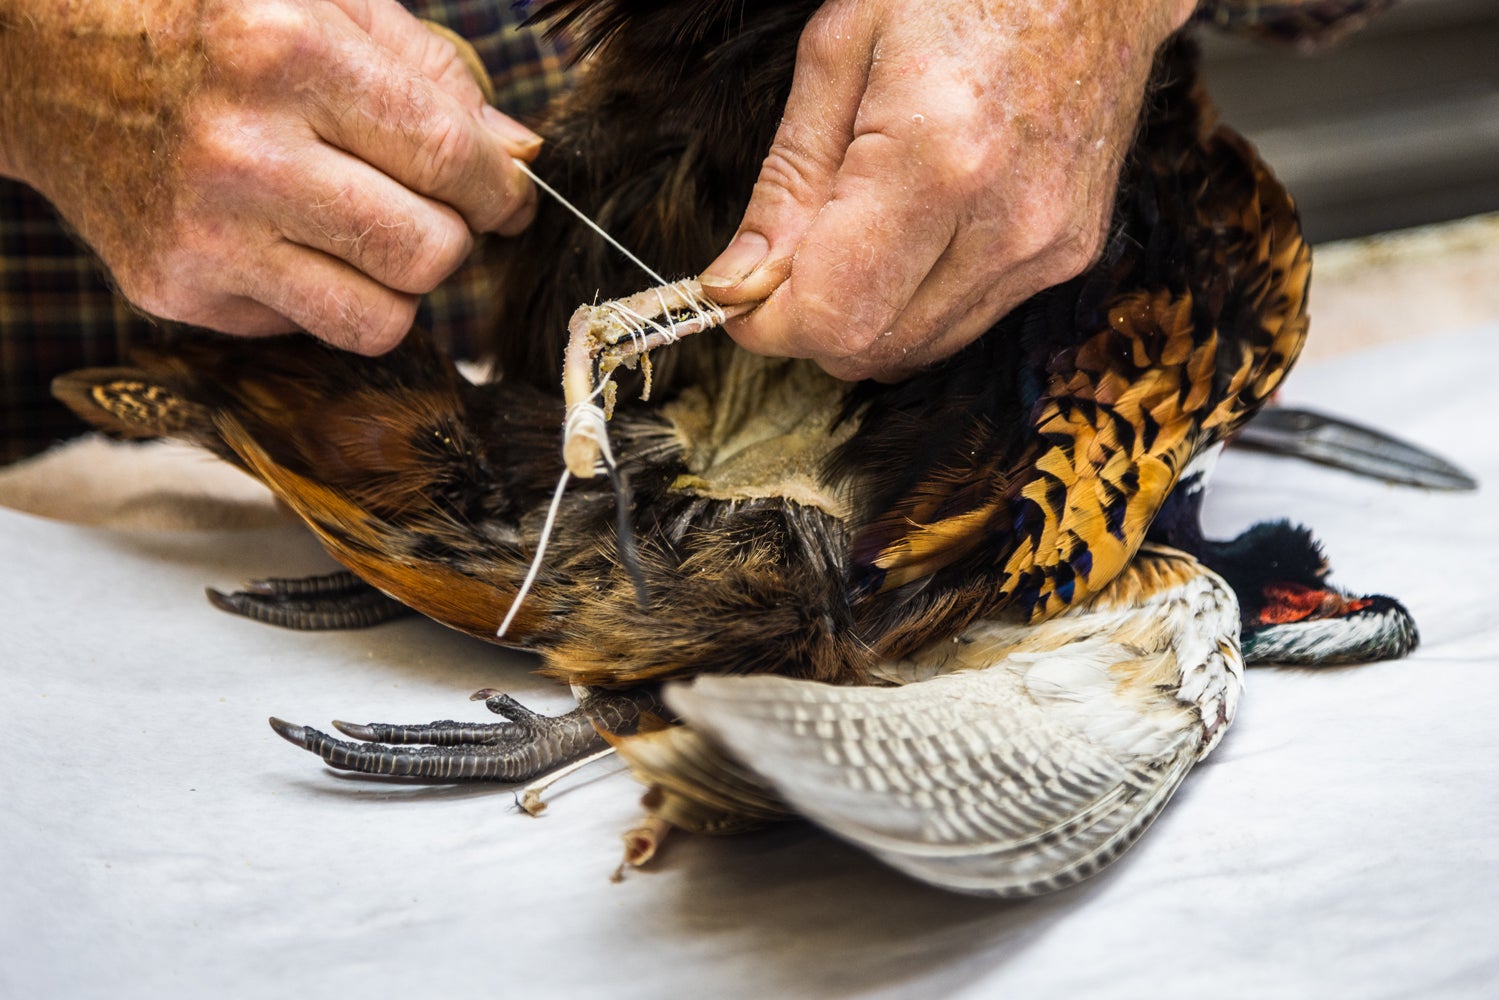 Taxidermist tying wire to the leg of a bird.